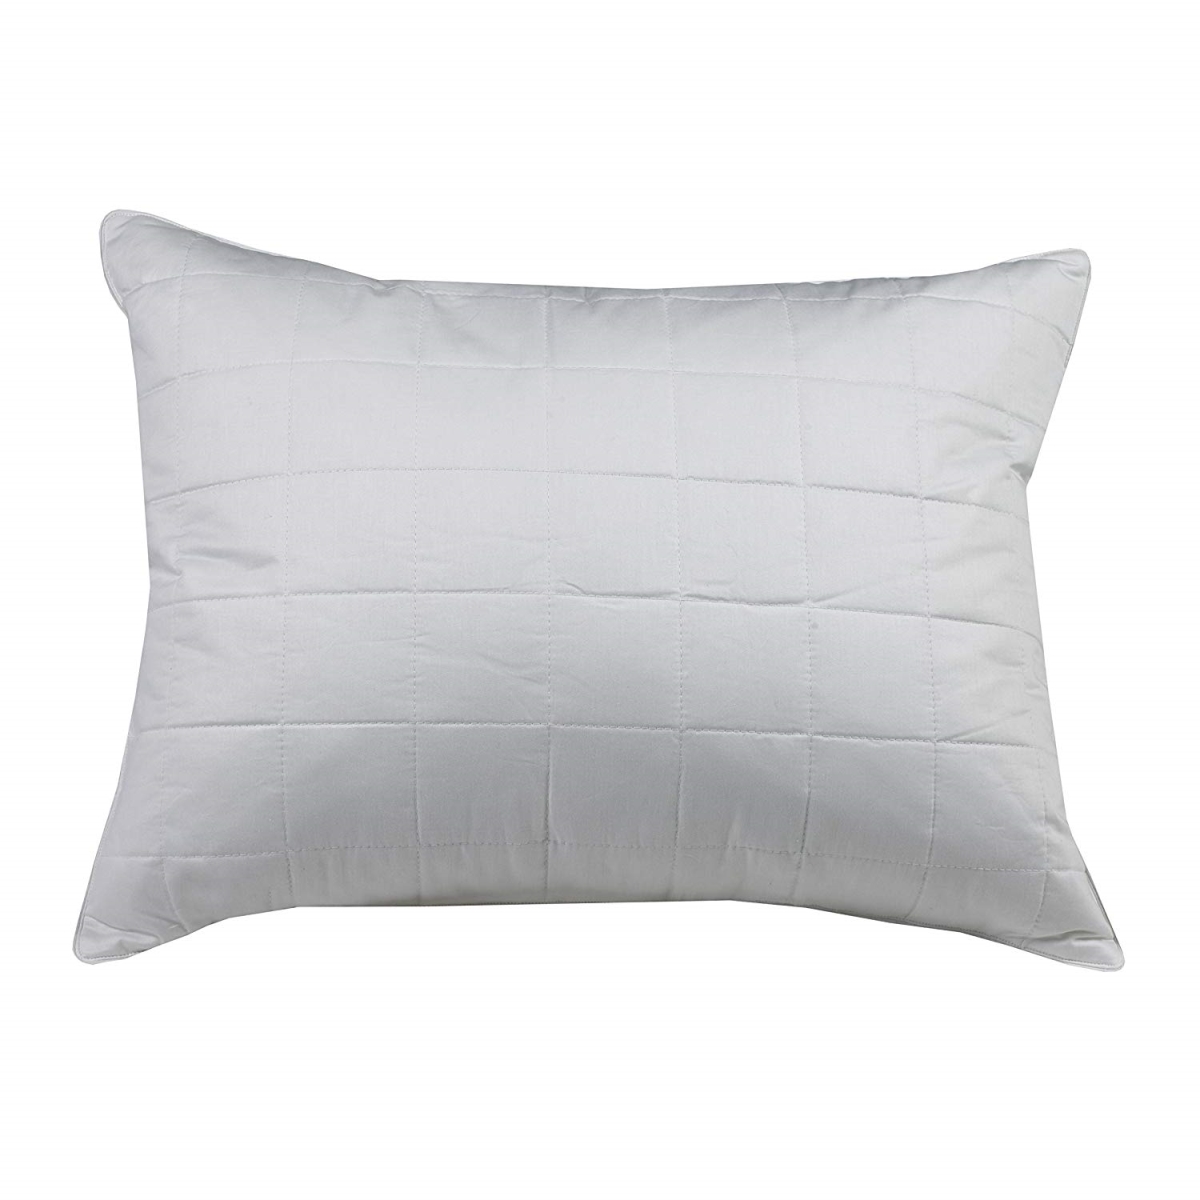 411098 Quilted Feather Pillow, White - King Size